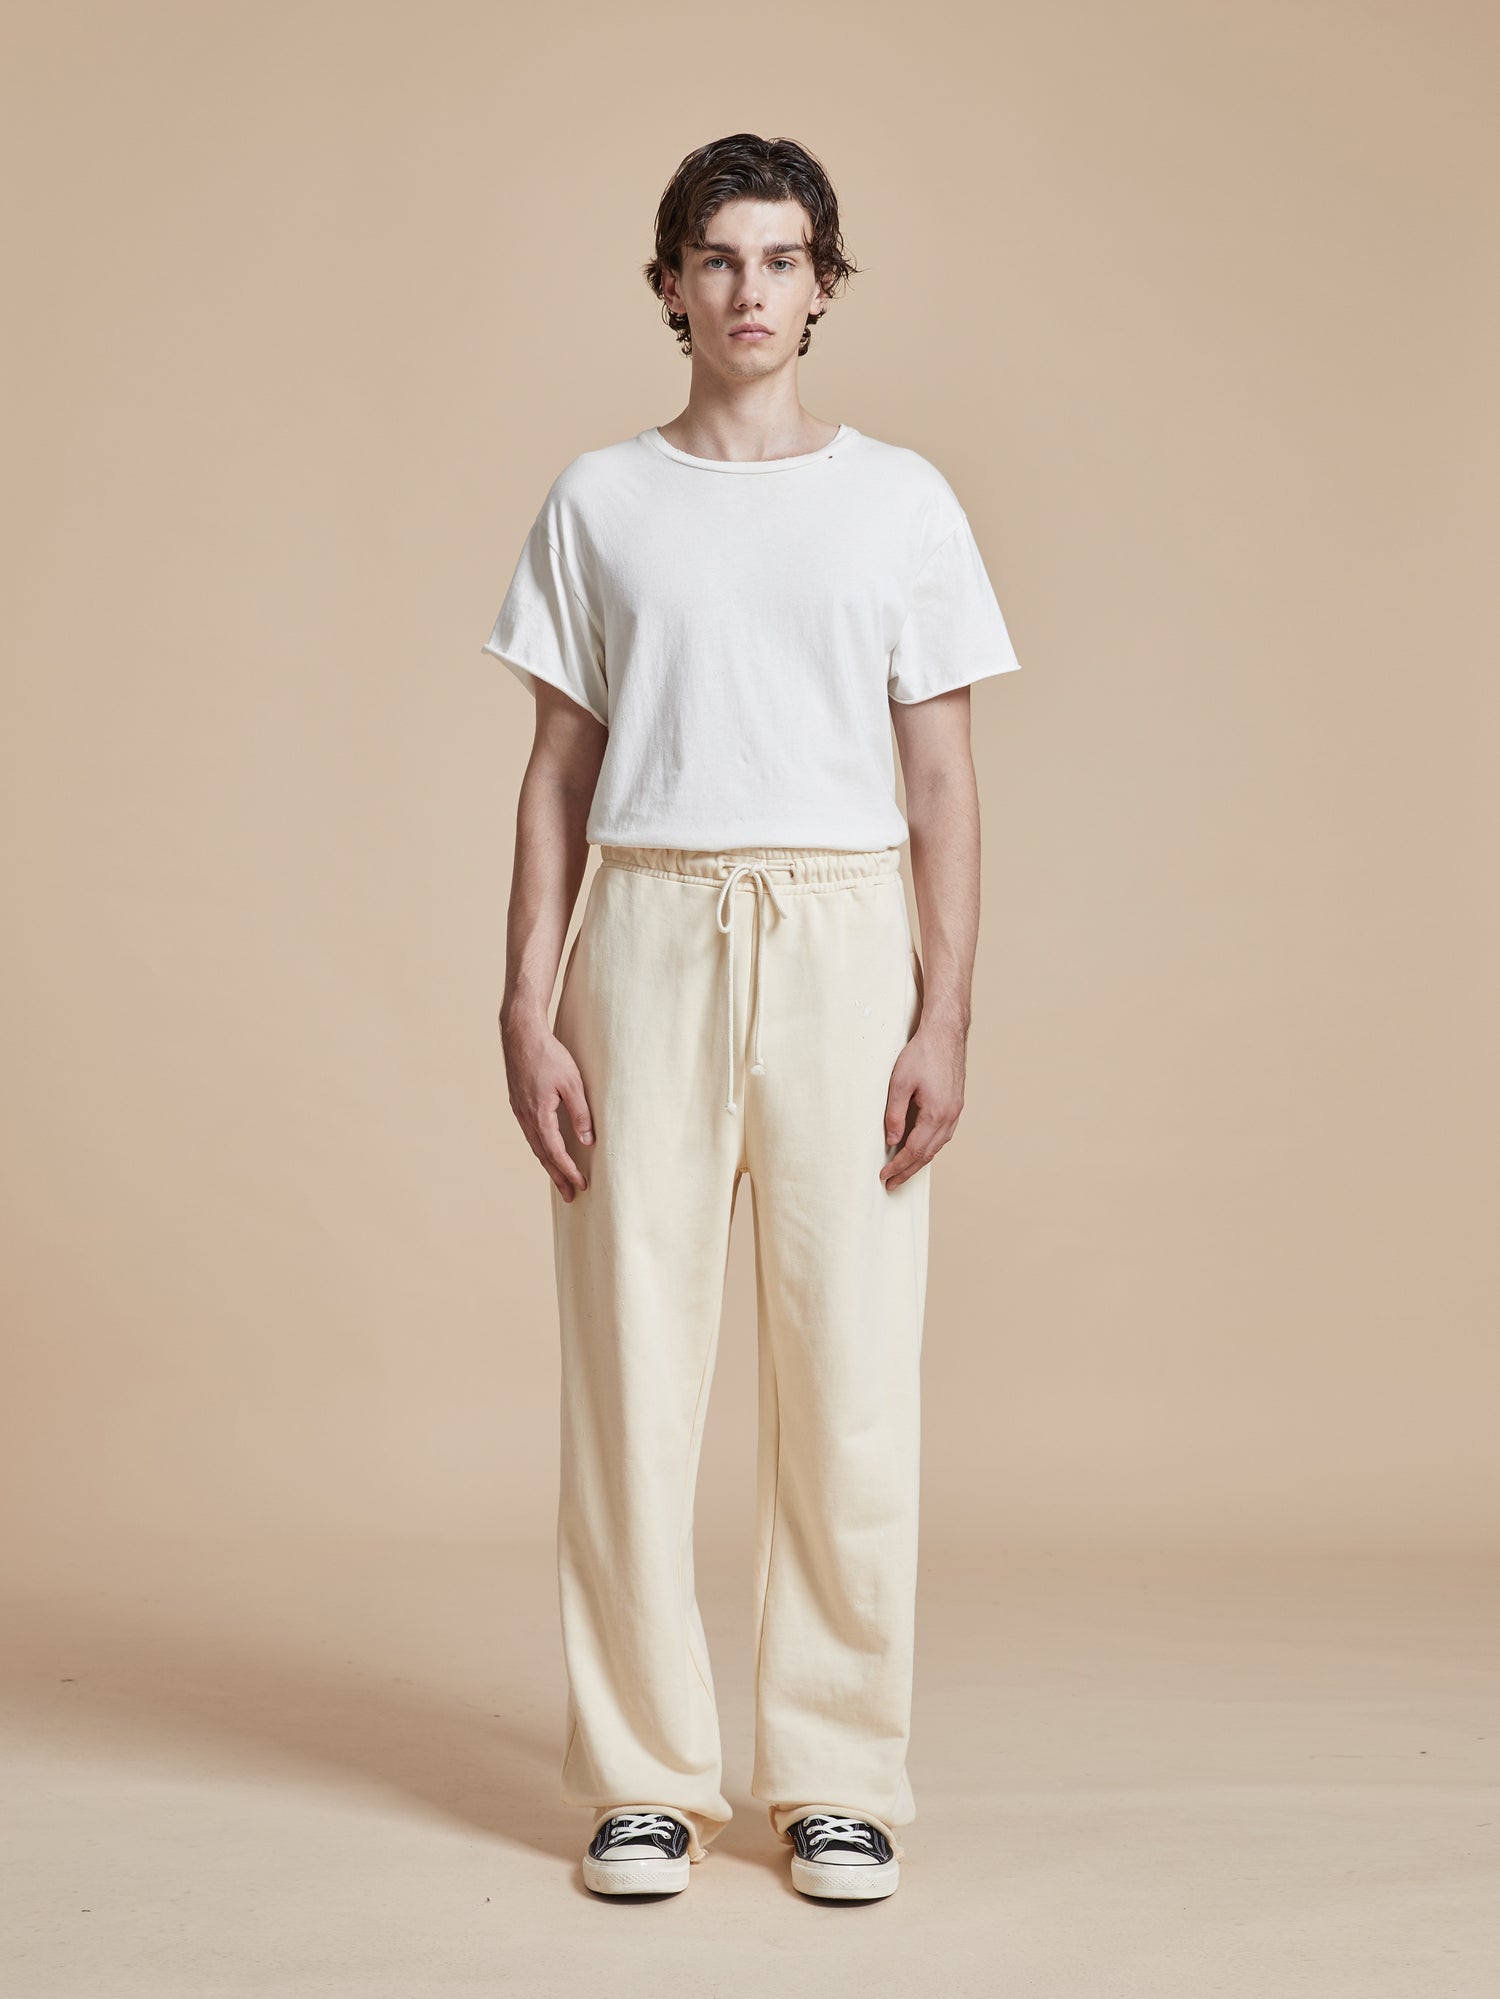 The model is wearing a white t-shirt and Found Sandshell Lounge Pants - a wardrobe staple.